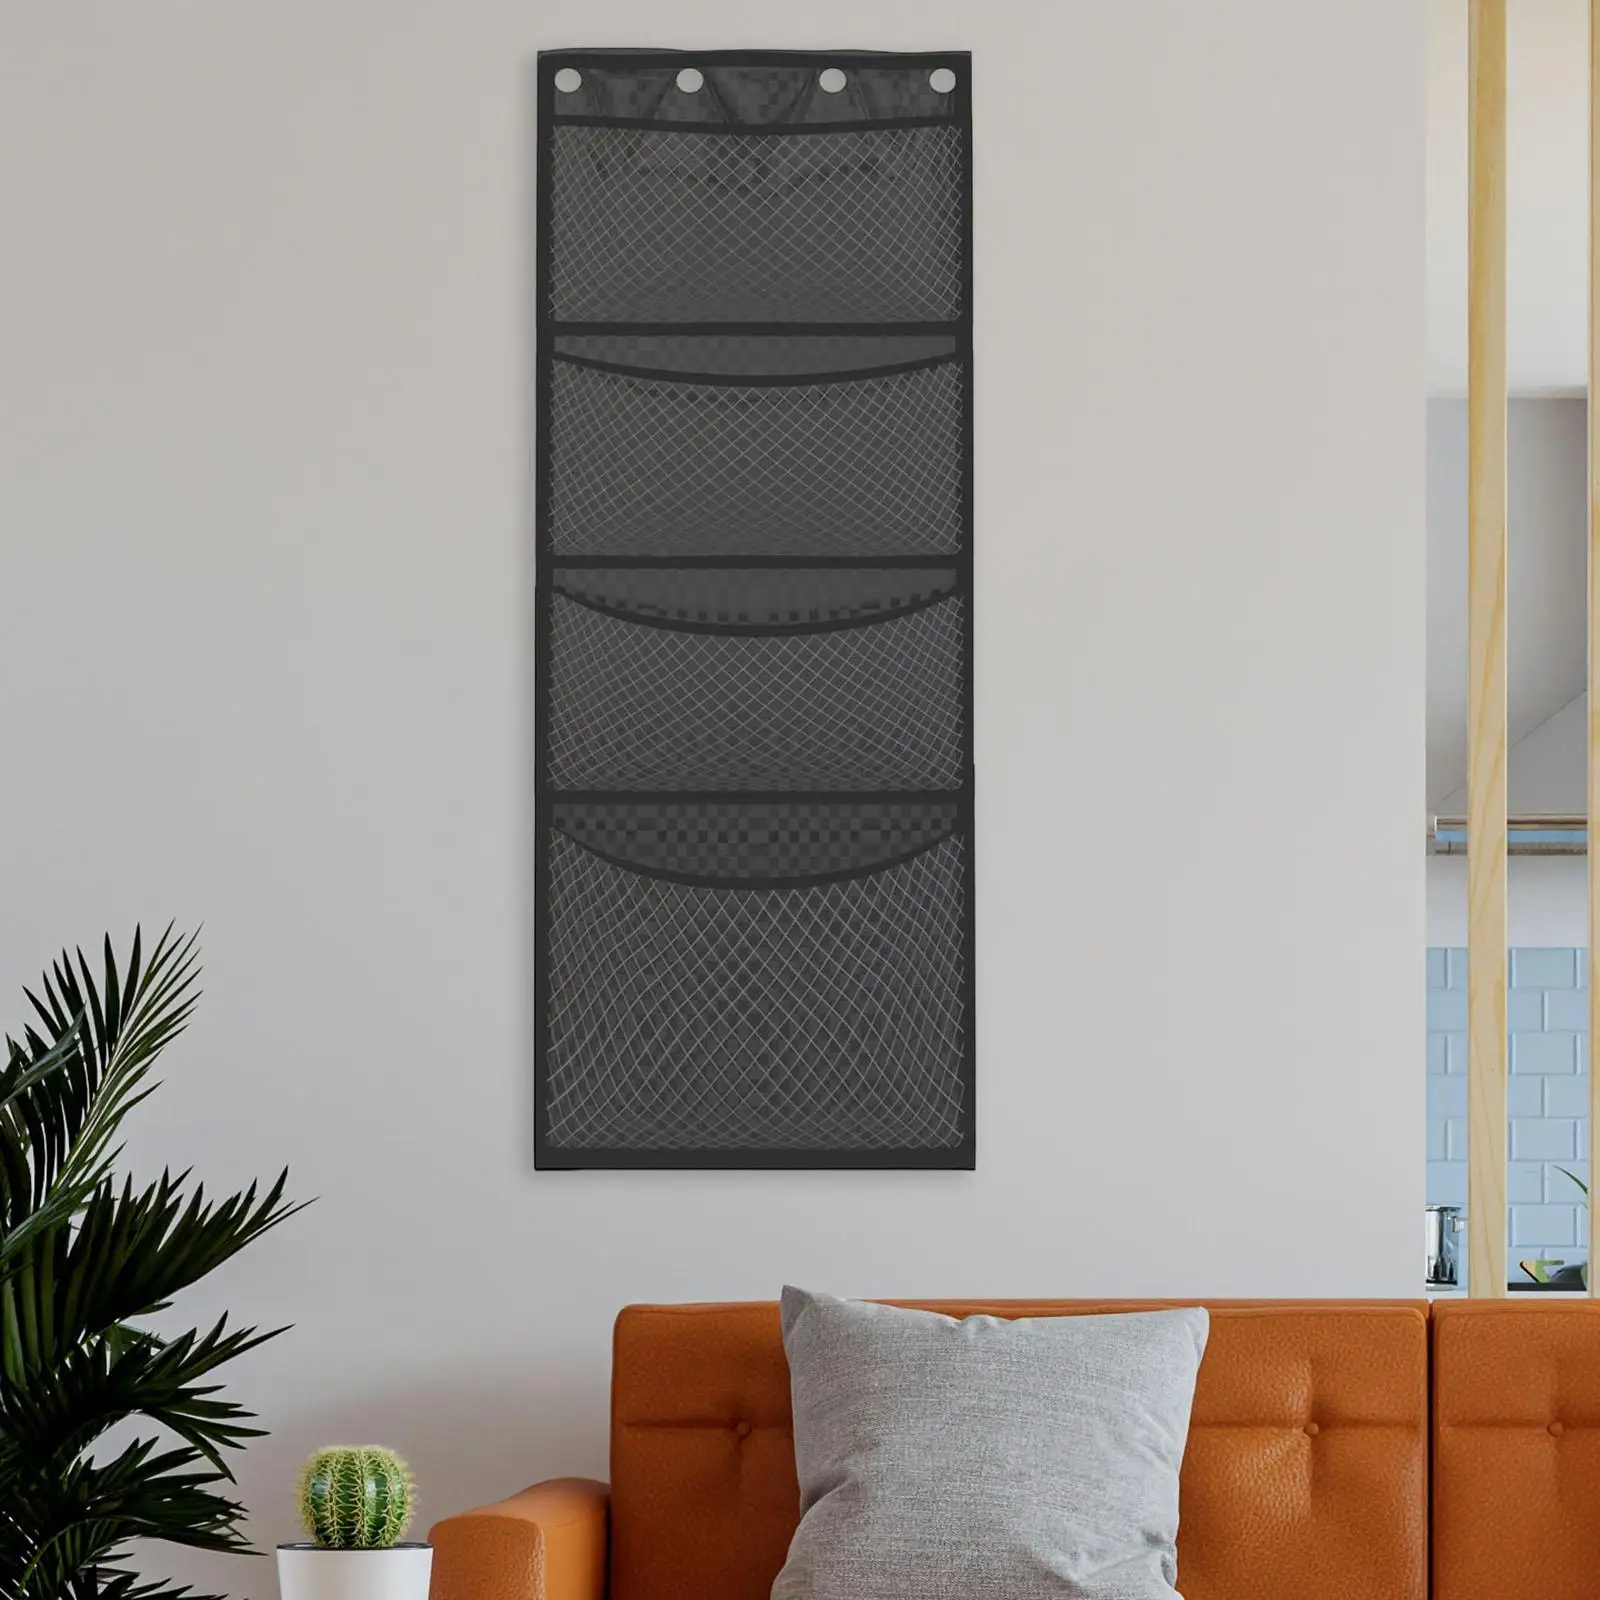 Hanging Hanging Mesh Bags Breathable Hanging Organization with 4 Large Pockets Durable Storage Pockets for Bedroom Closet Wall